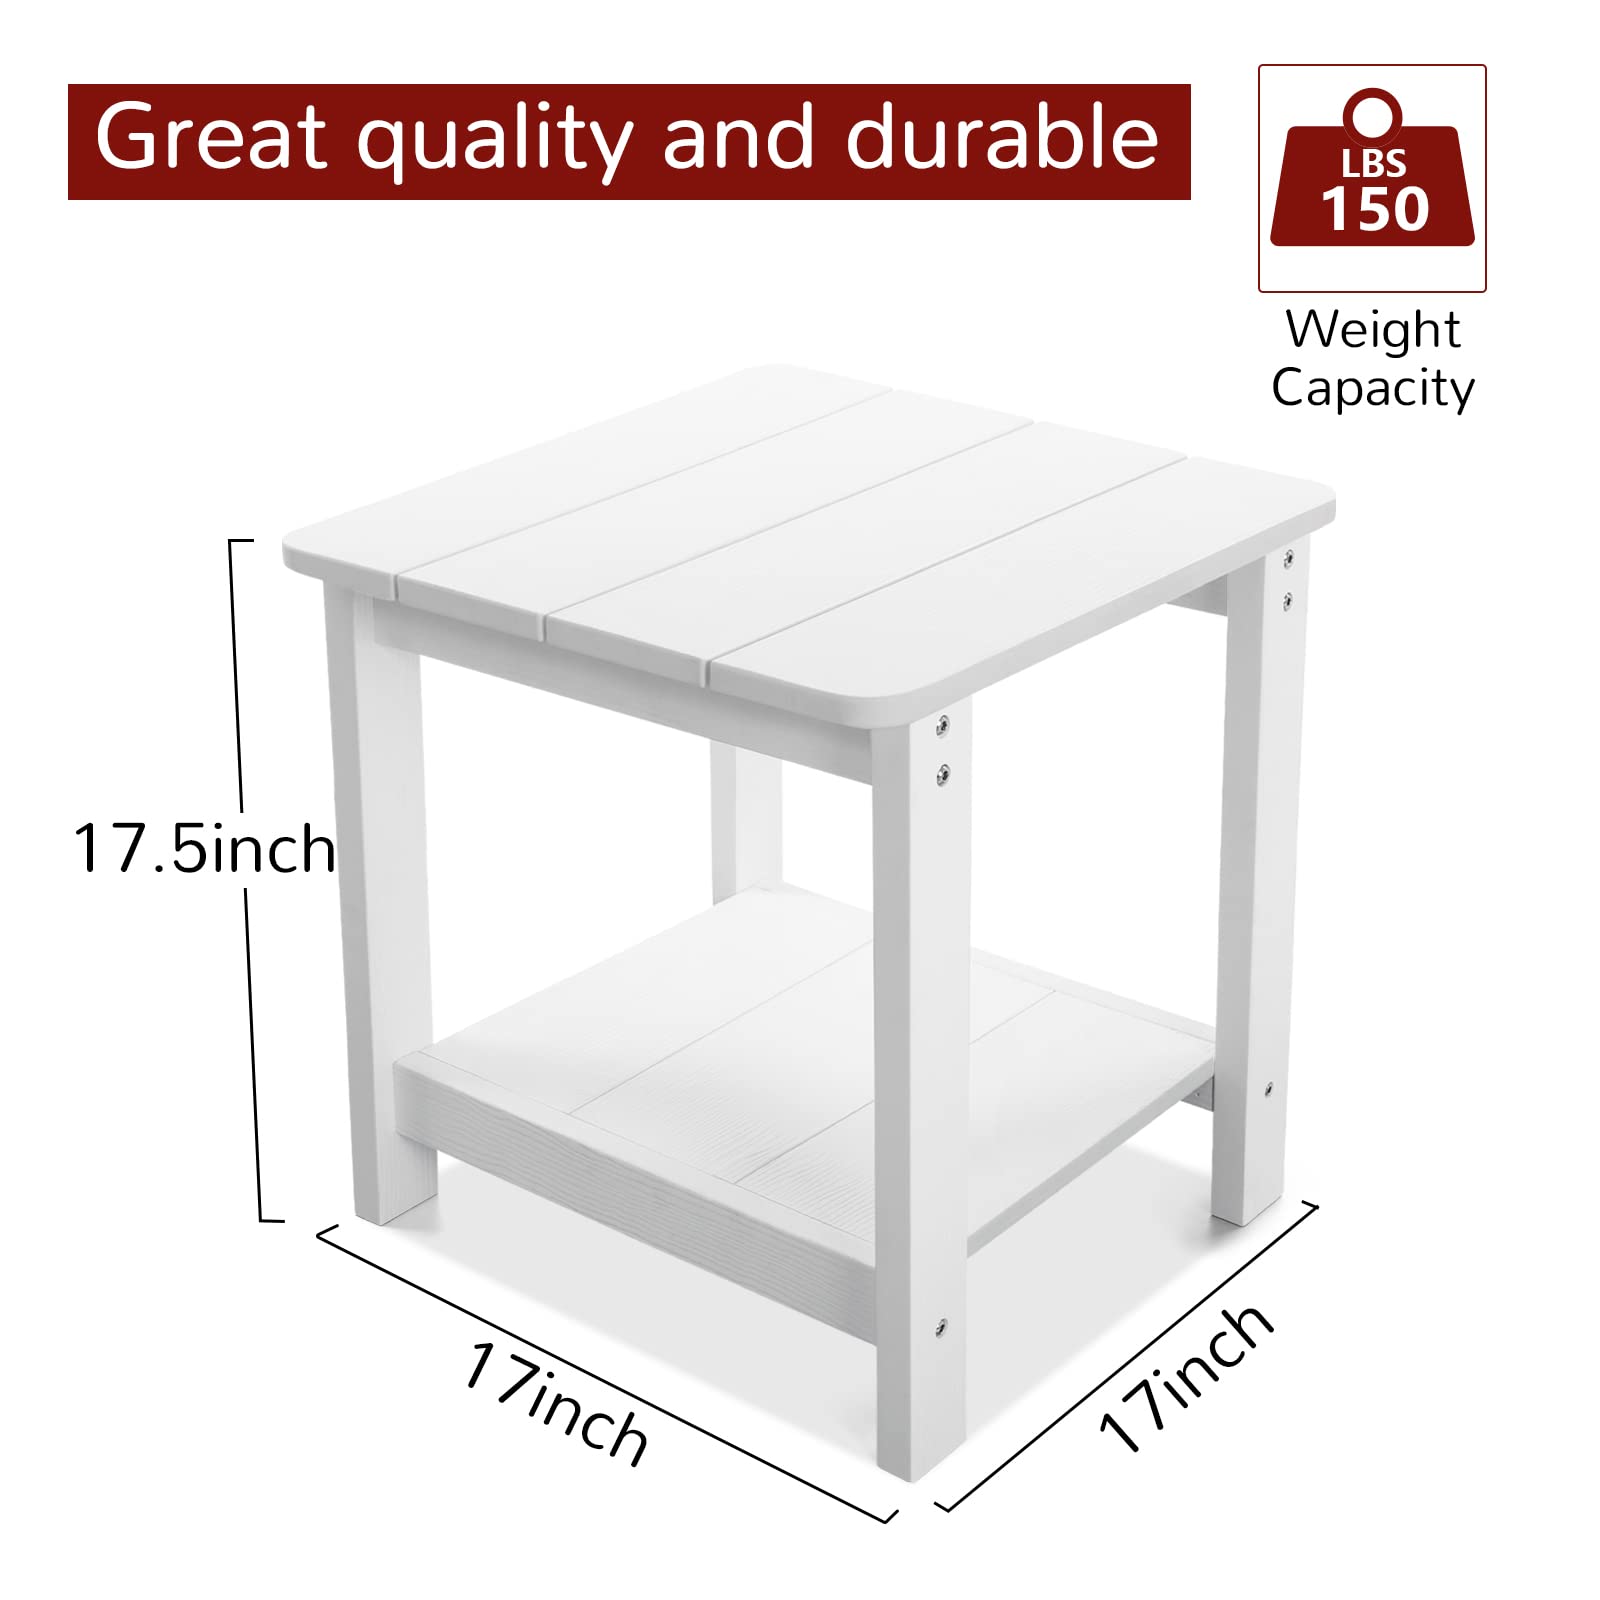 Outdoor Side Table, Weather Resistant 2-Tier Side Table, Hips Plastic End Table, Adirondack Side Table, Rocker Side Table for Backyard, Patio, Pool, Deck and Garden, White, 17 x 17x 17.5 inches - image 3 of 7